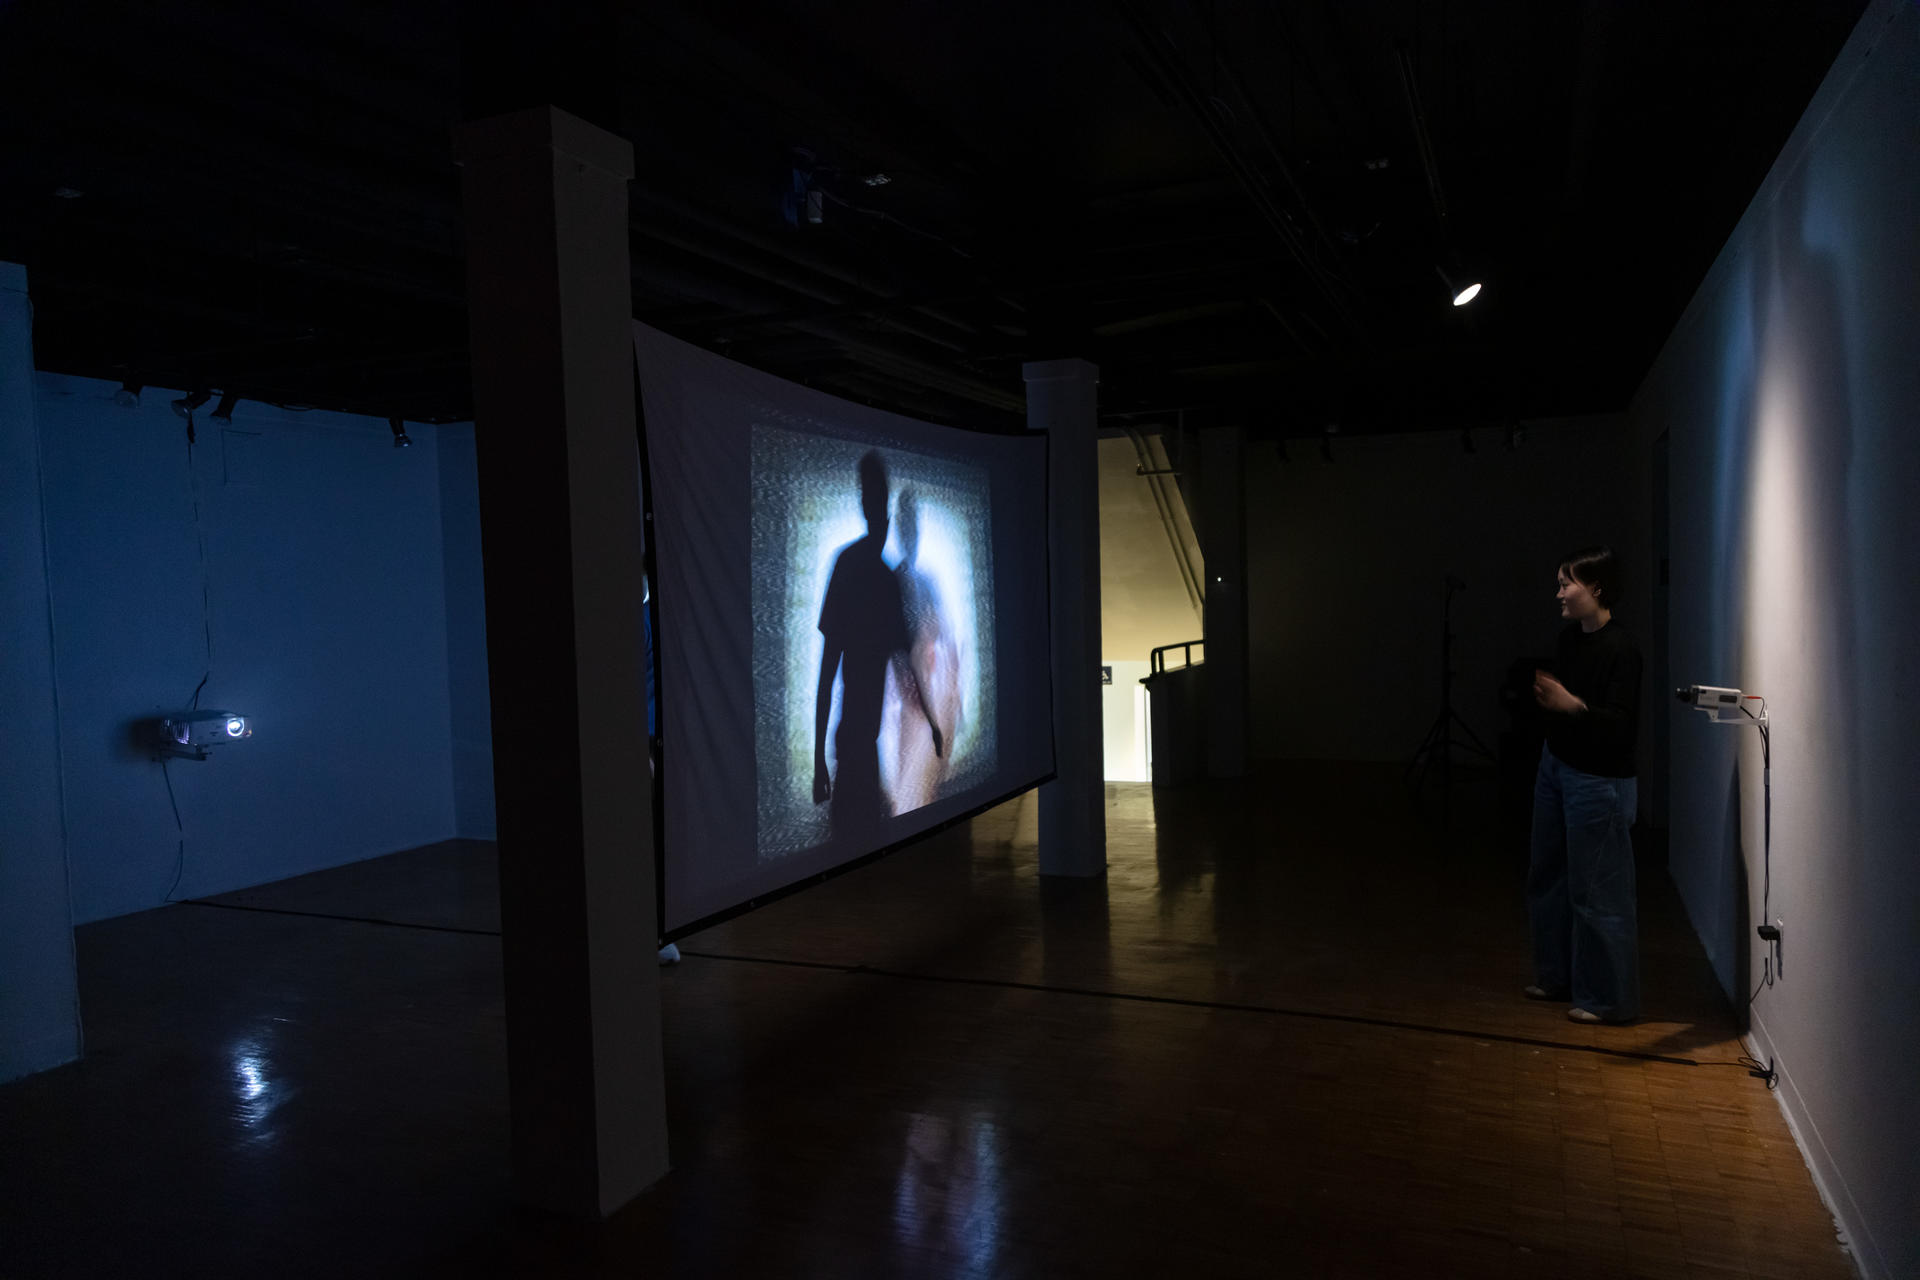 Person in front of projection screen with their image projected onto the screen